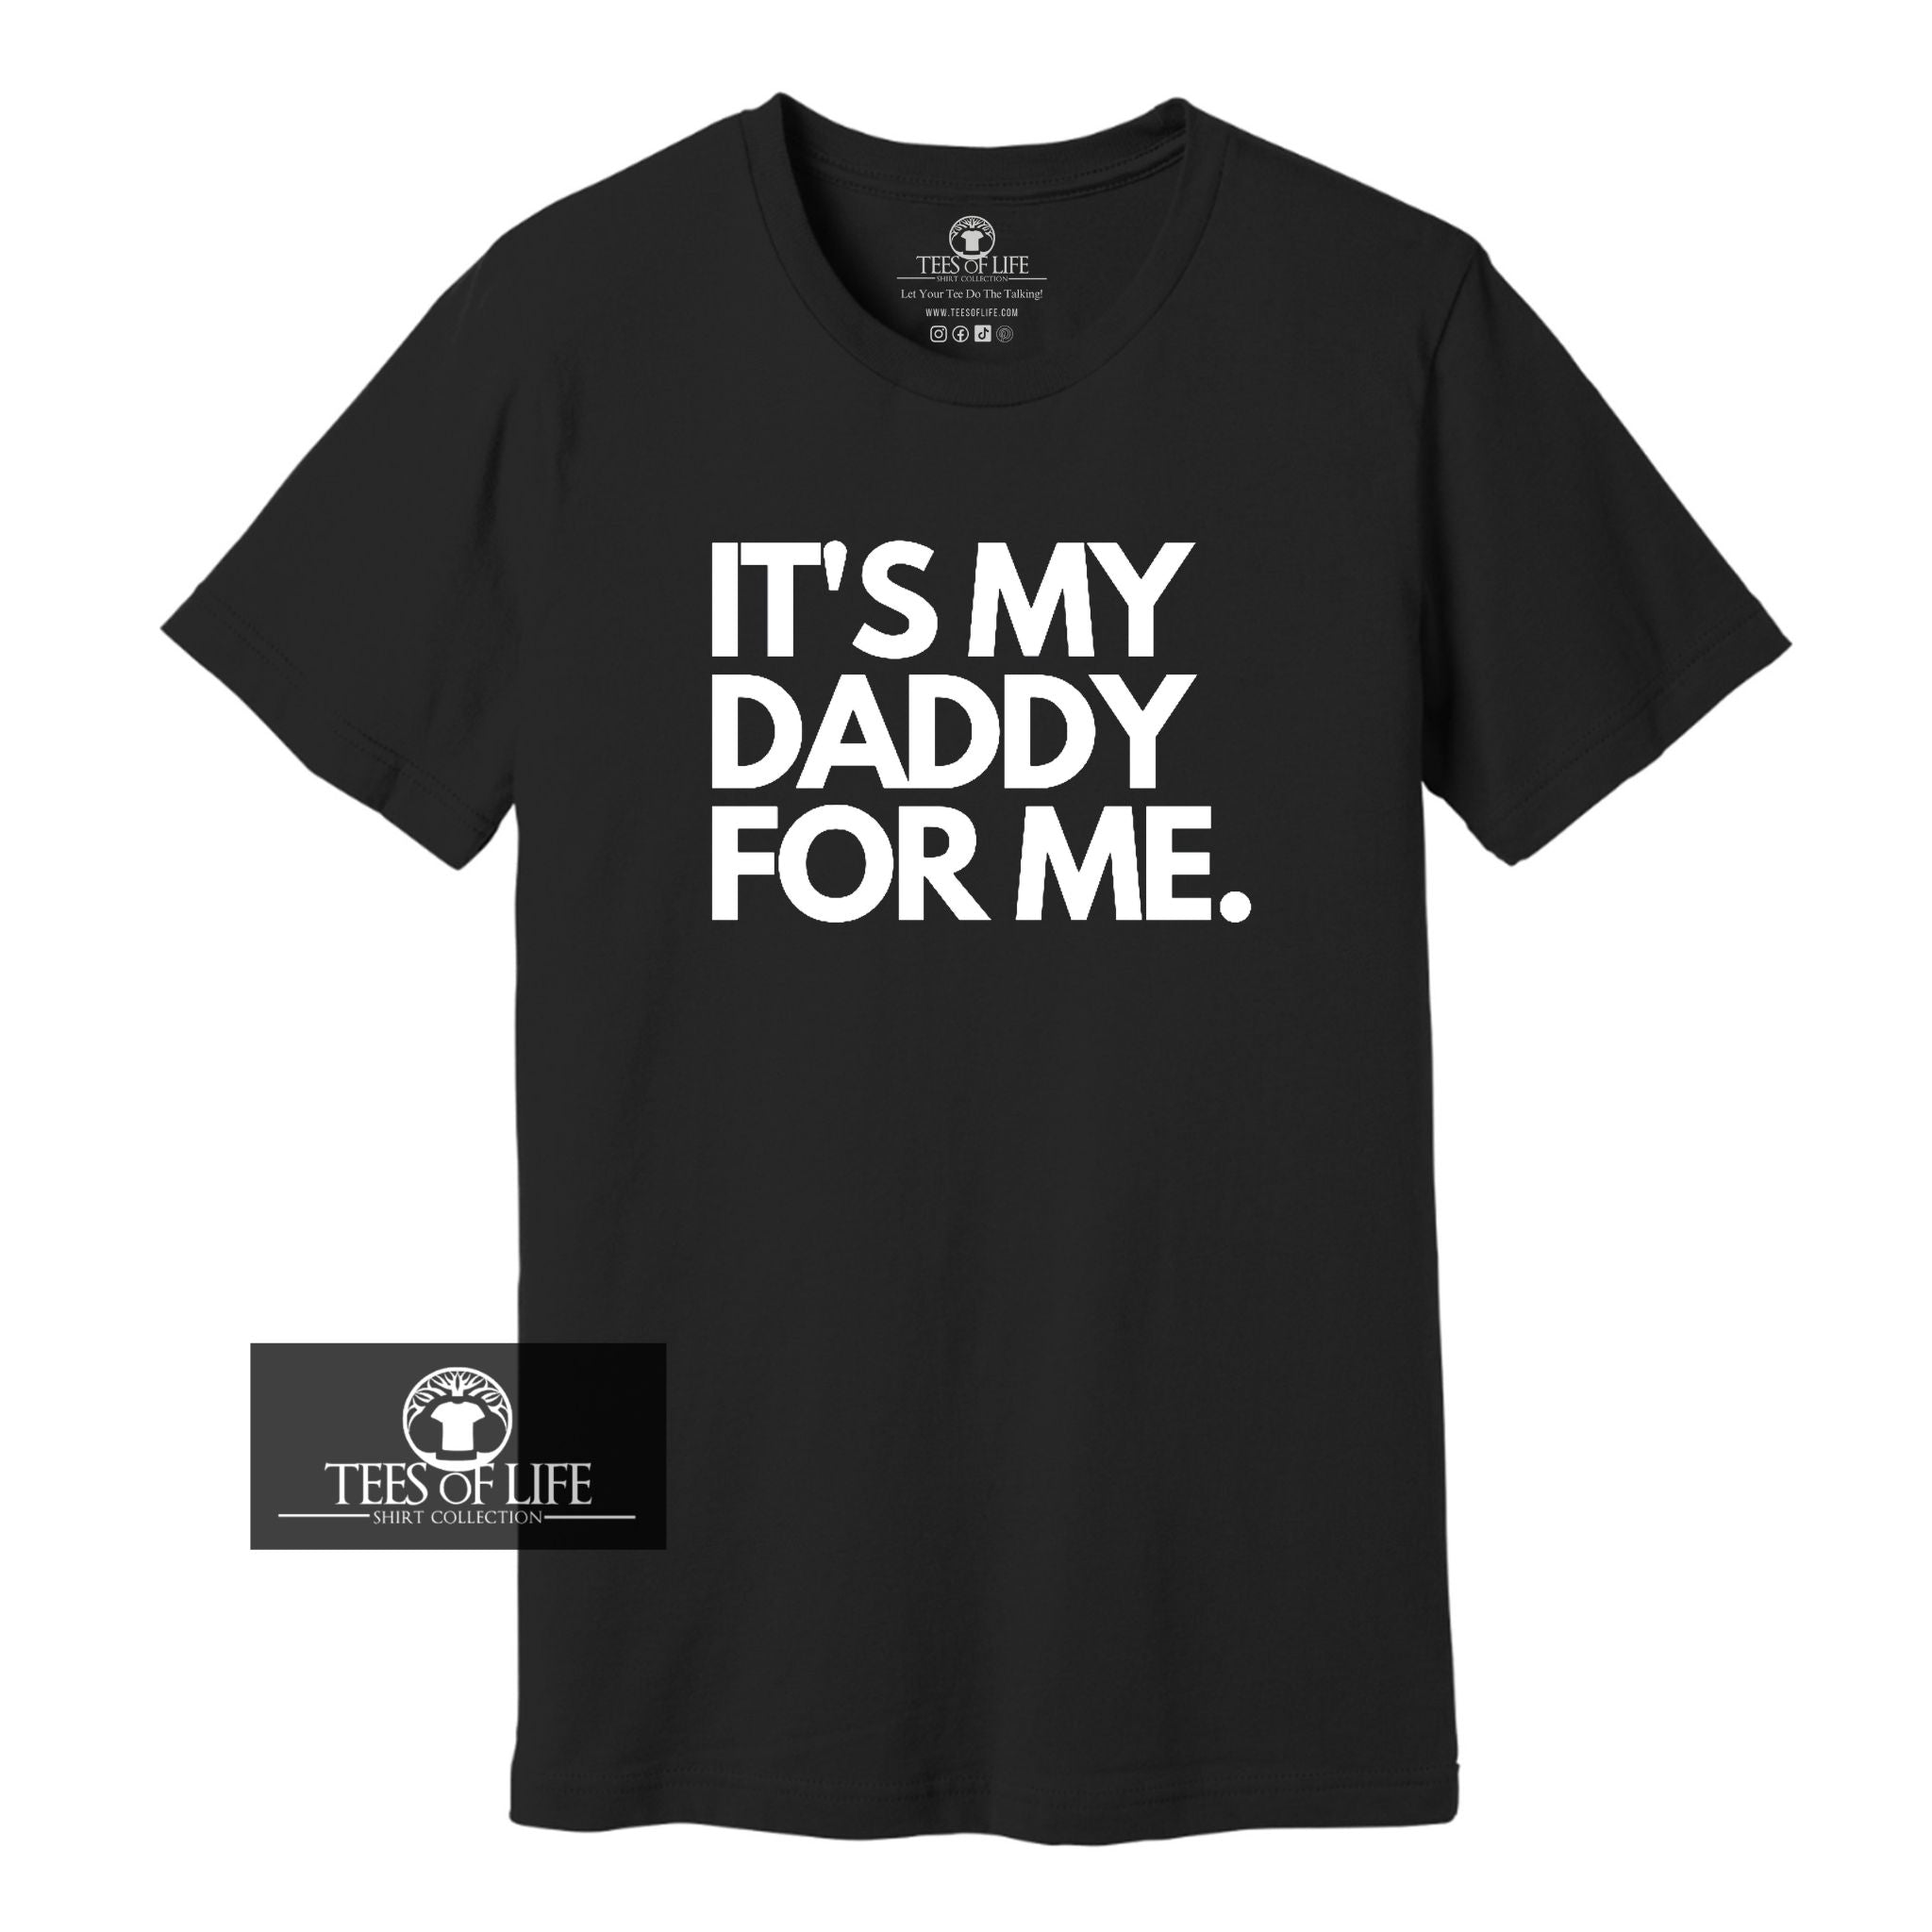 (RTS) 3XL It's My Daddy For Me Unisex Tee